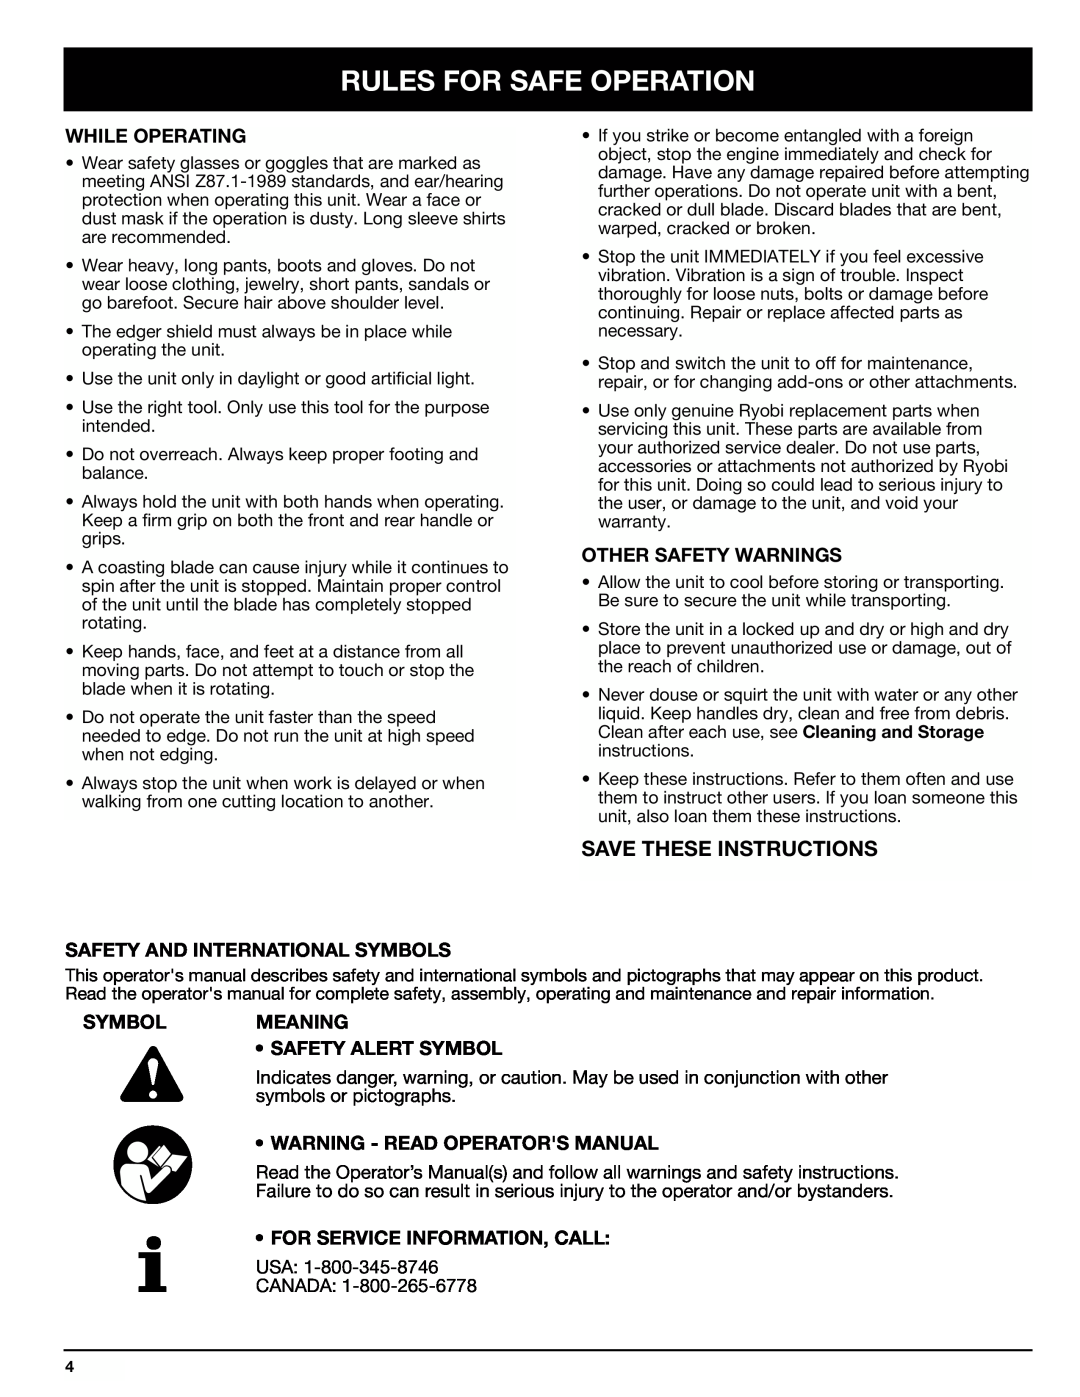 Ryobi LE720r manual Save These Instructions, While Operating, Other Safety Warnings, Safety And International Symbols 